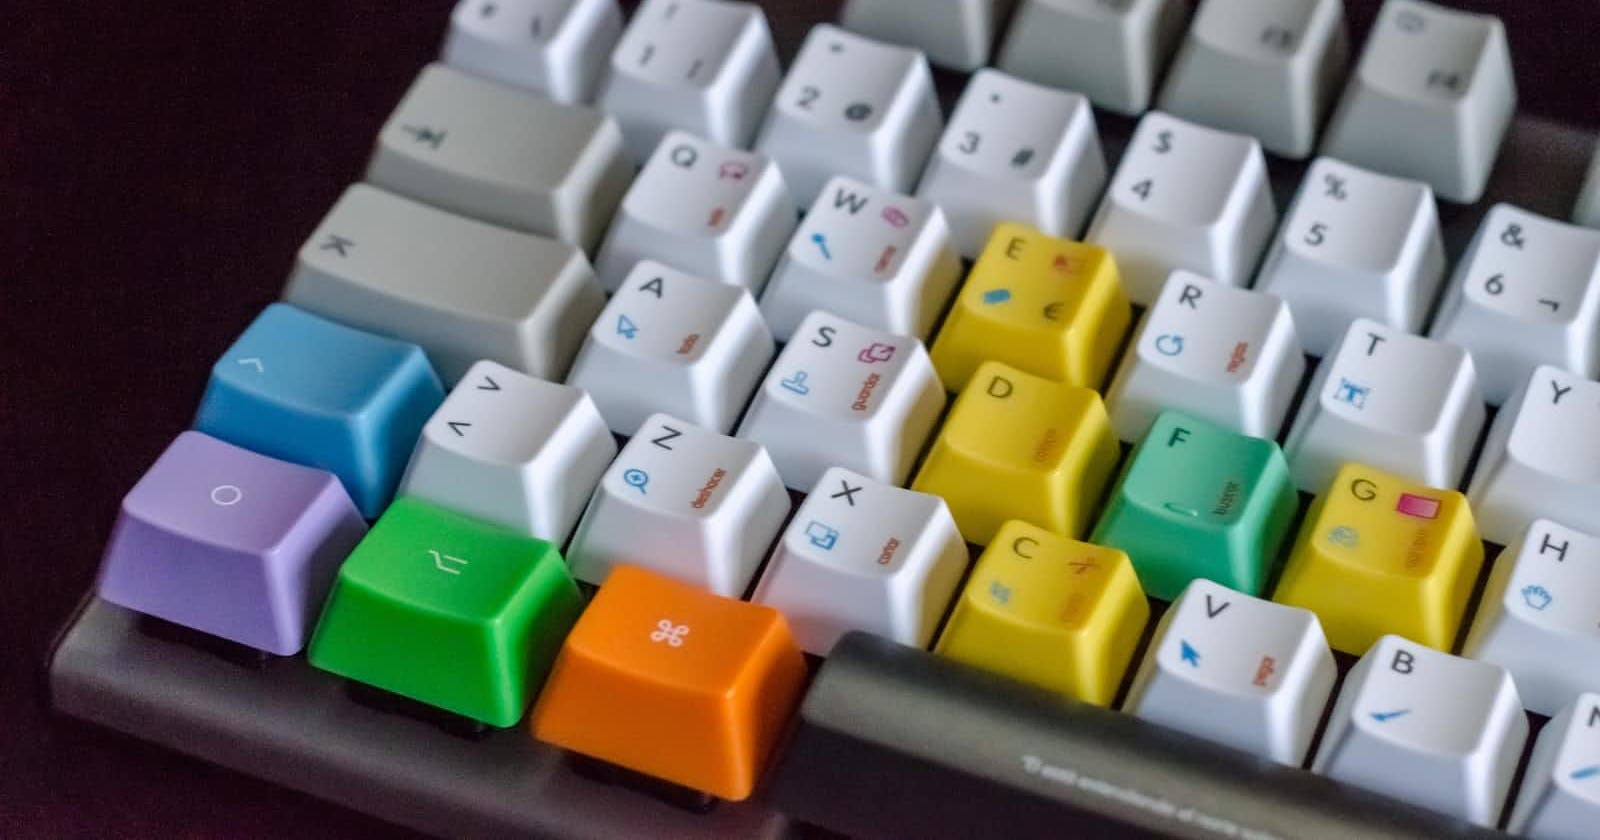 Maximize Your Productivity with These IntelliJ IDEA Keyboard Shortcuts